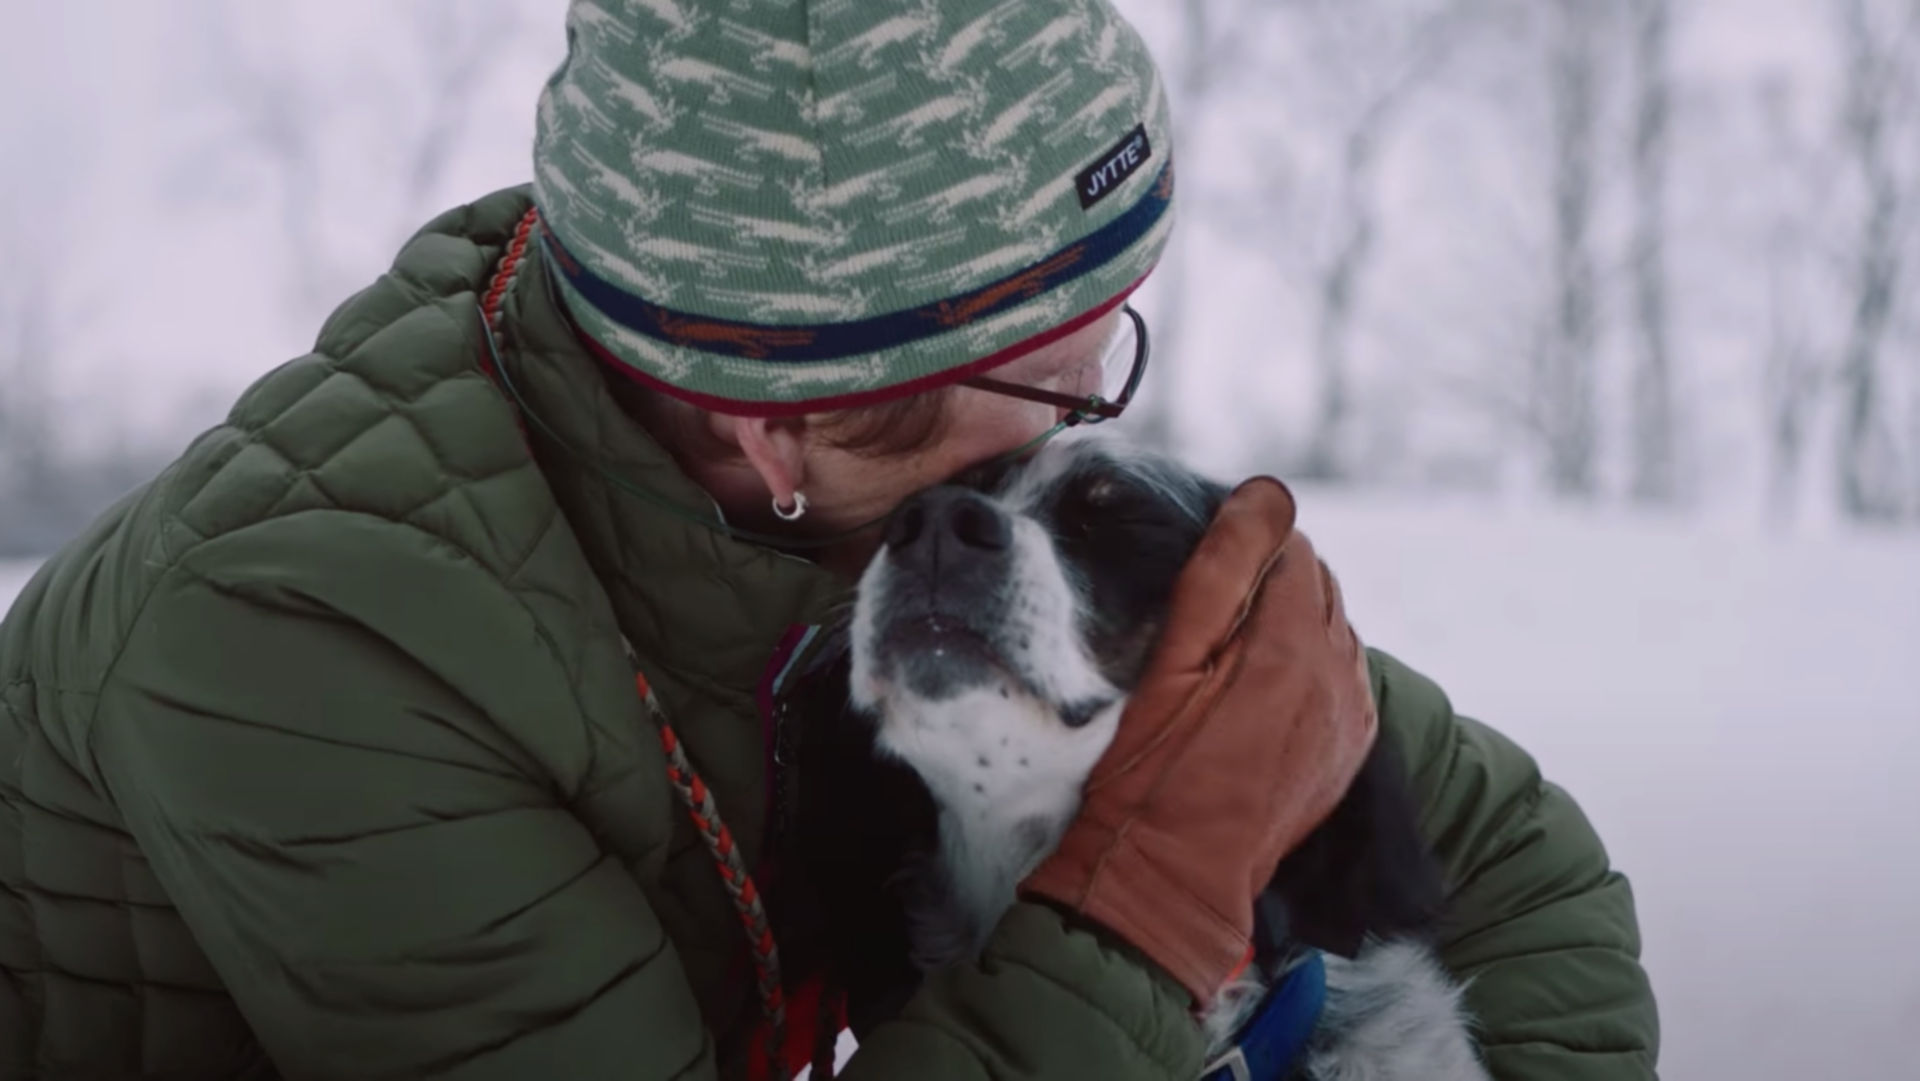 A woman in a green jacket and winter hat crouches down to hug a black and white dog in a snowy field surrounded by trees.